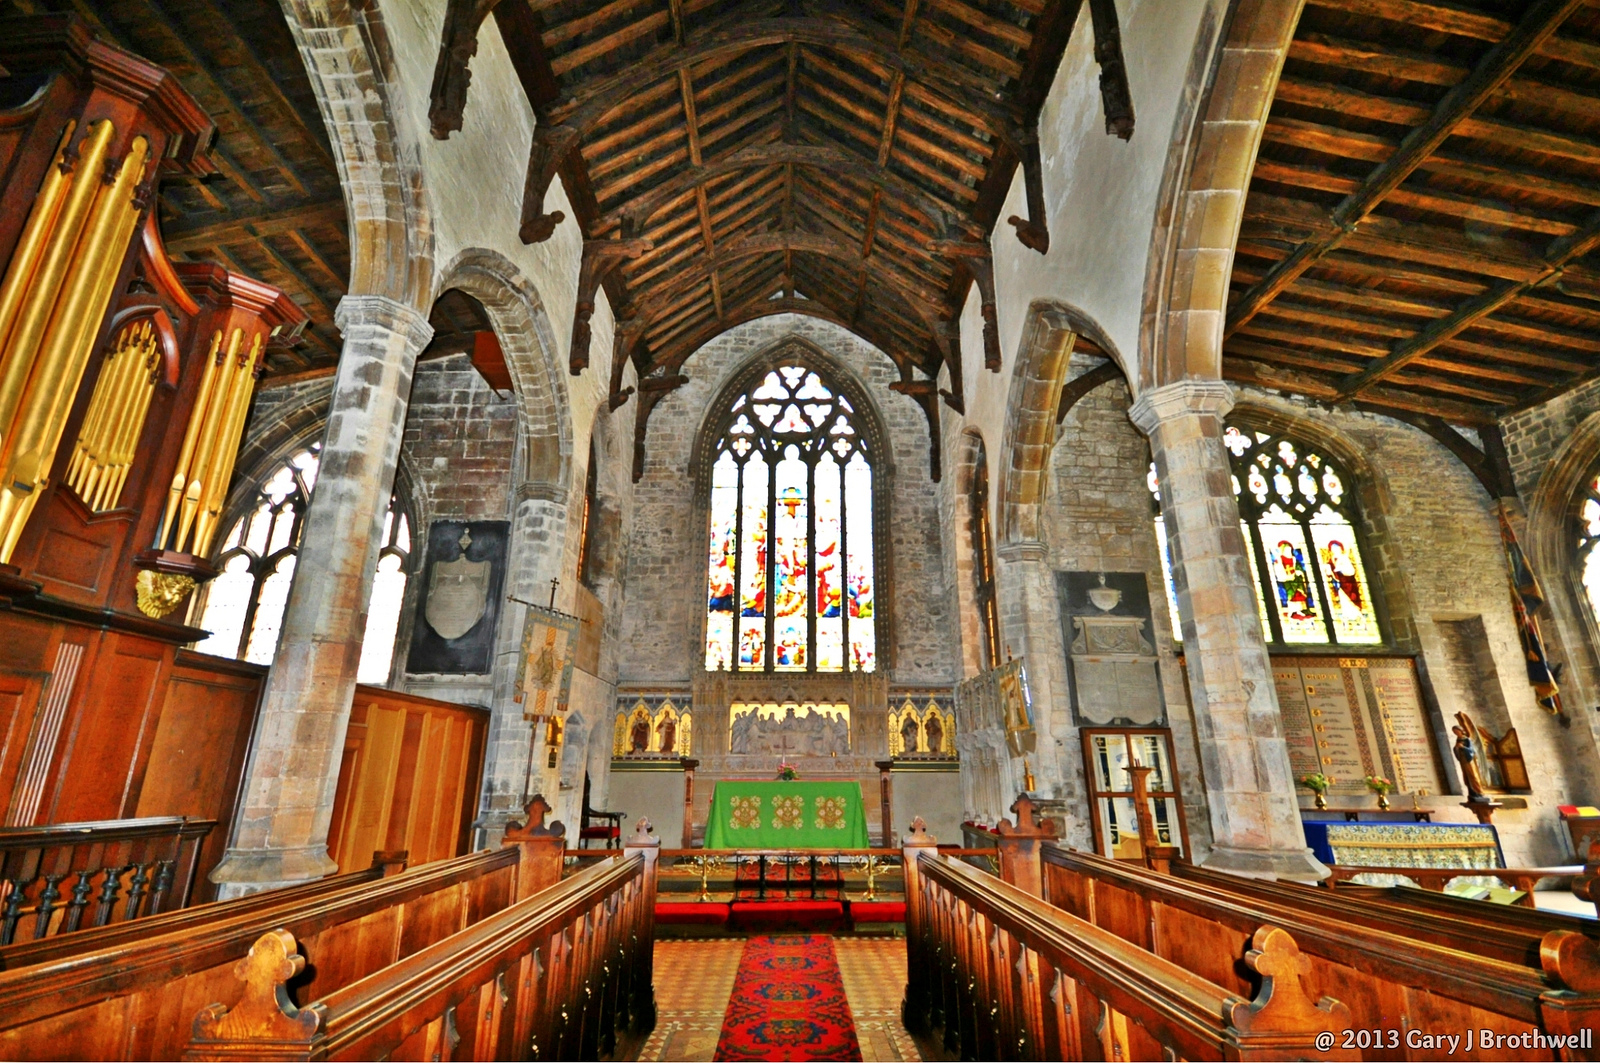 The parish church of St Mary in Long Sutton